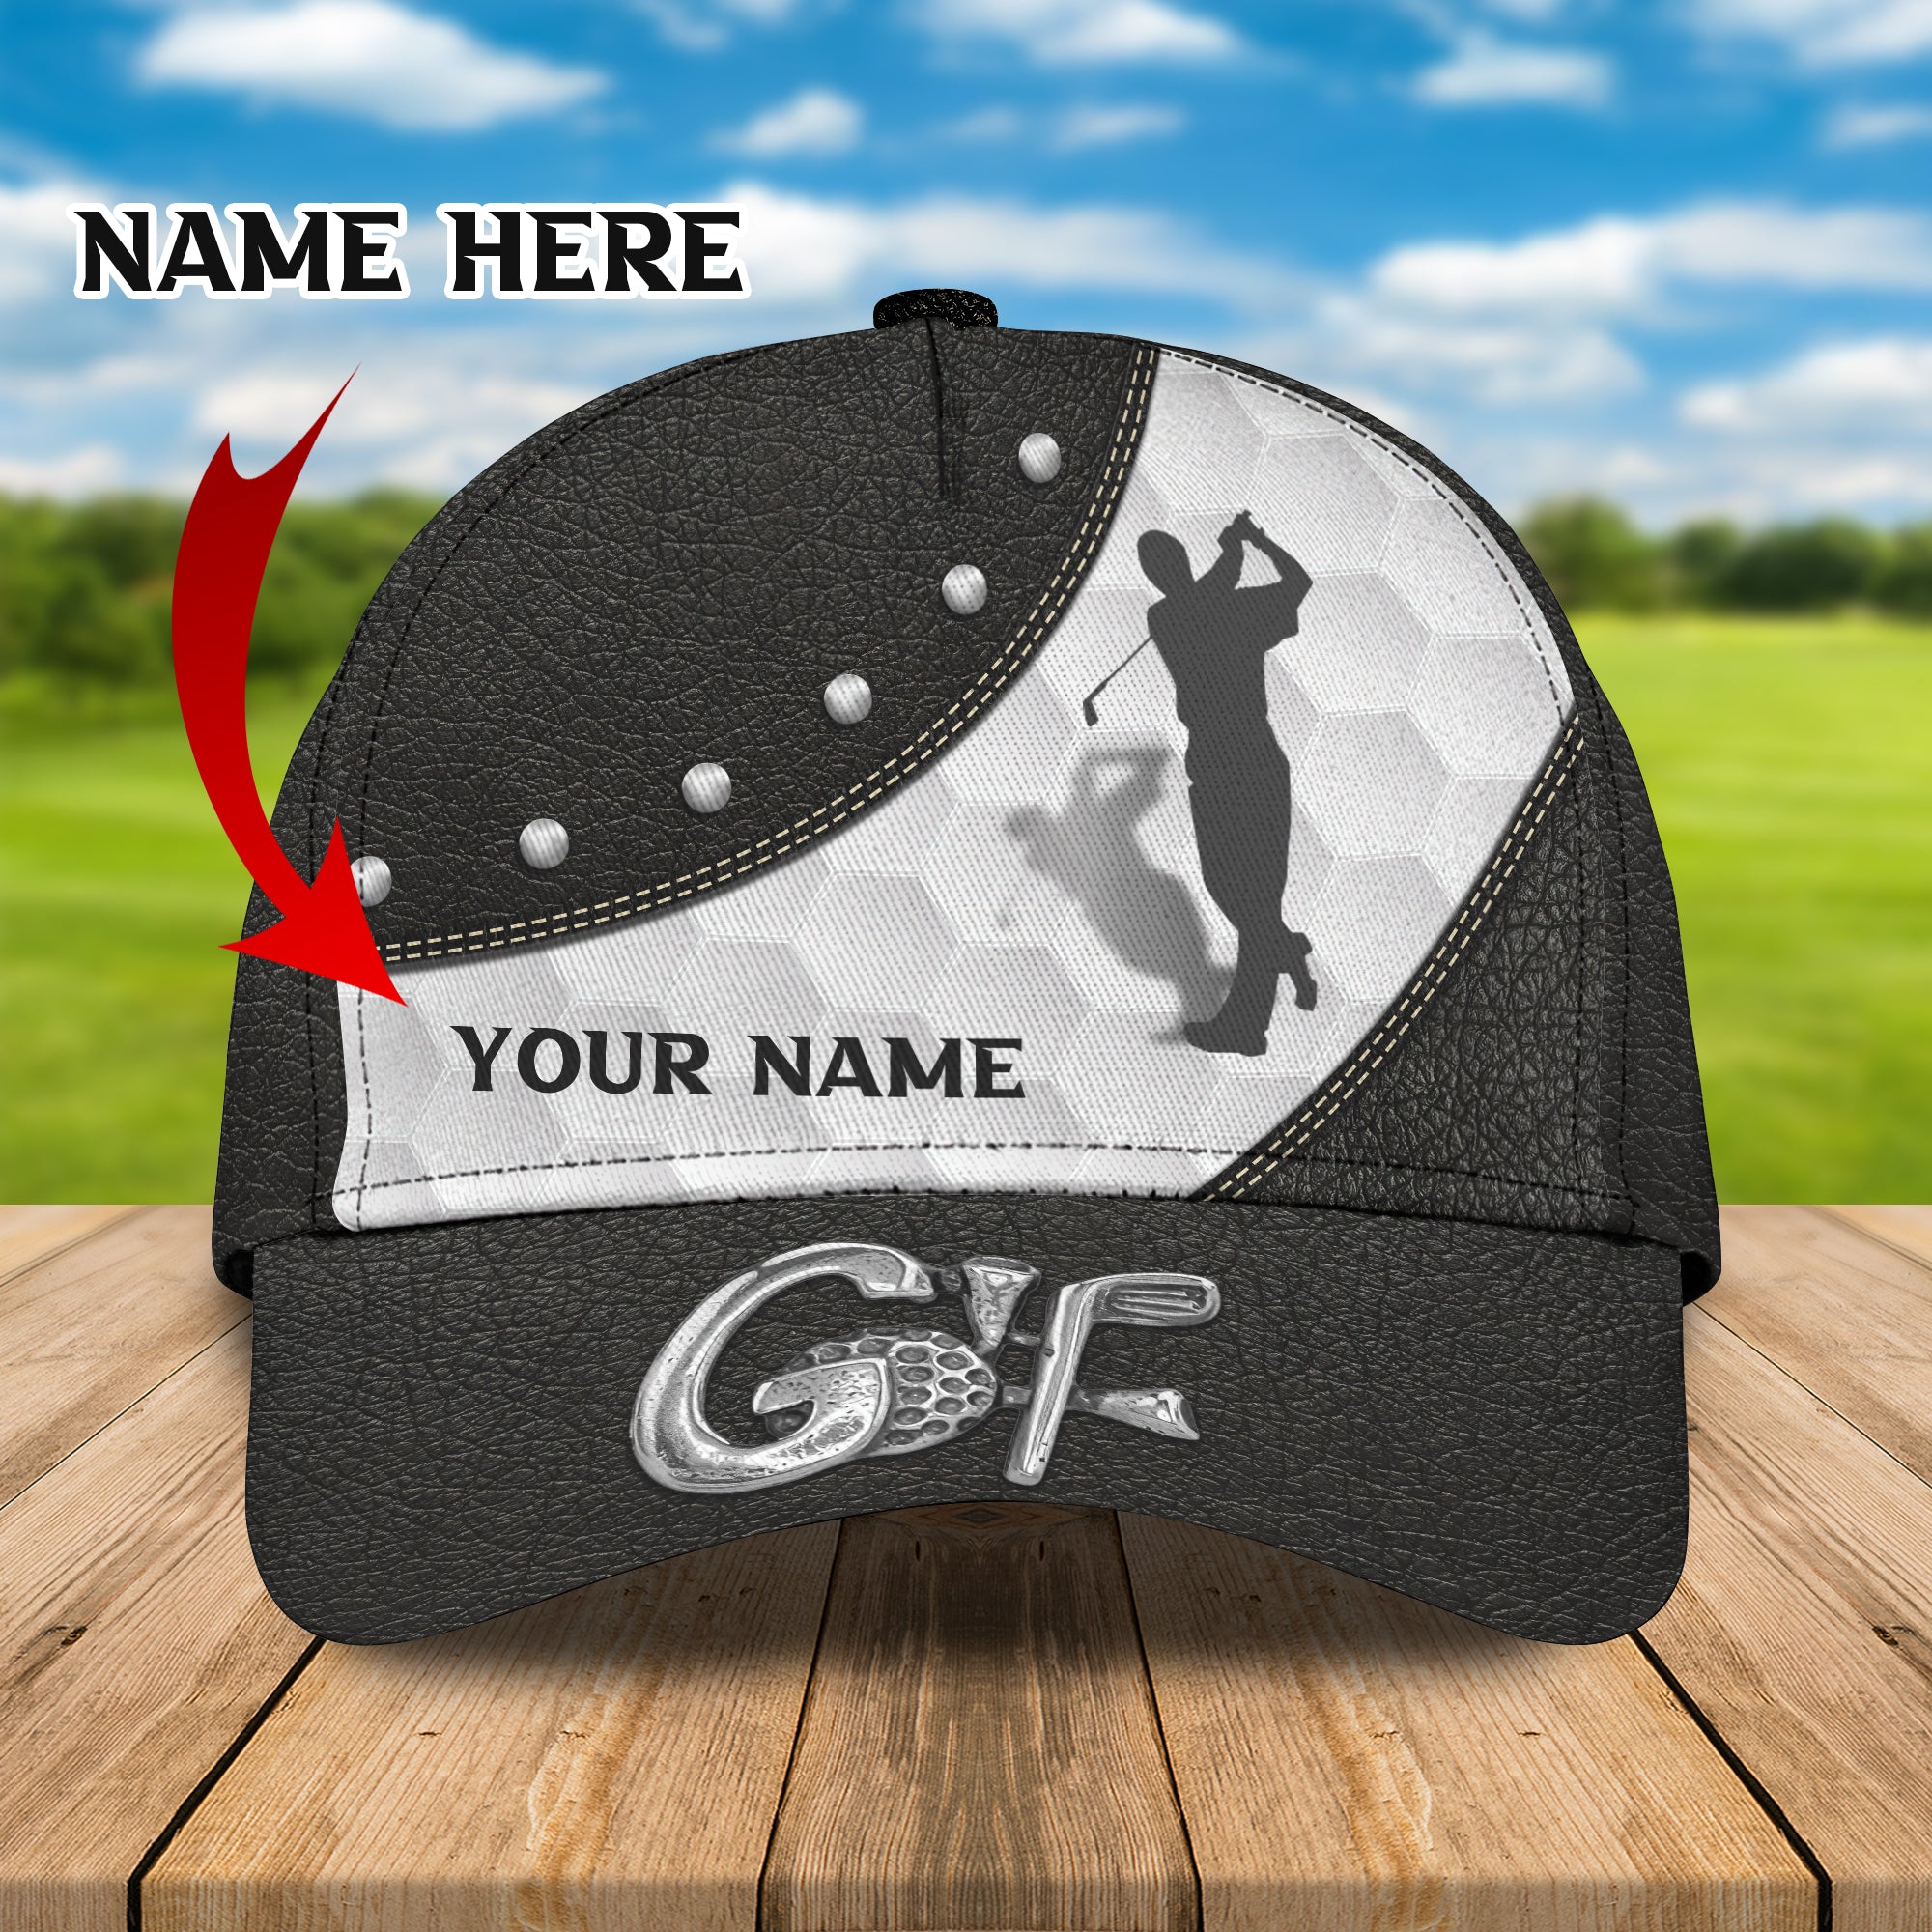 Golf - Personalized Name Cap 3 - Tad - Hkm